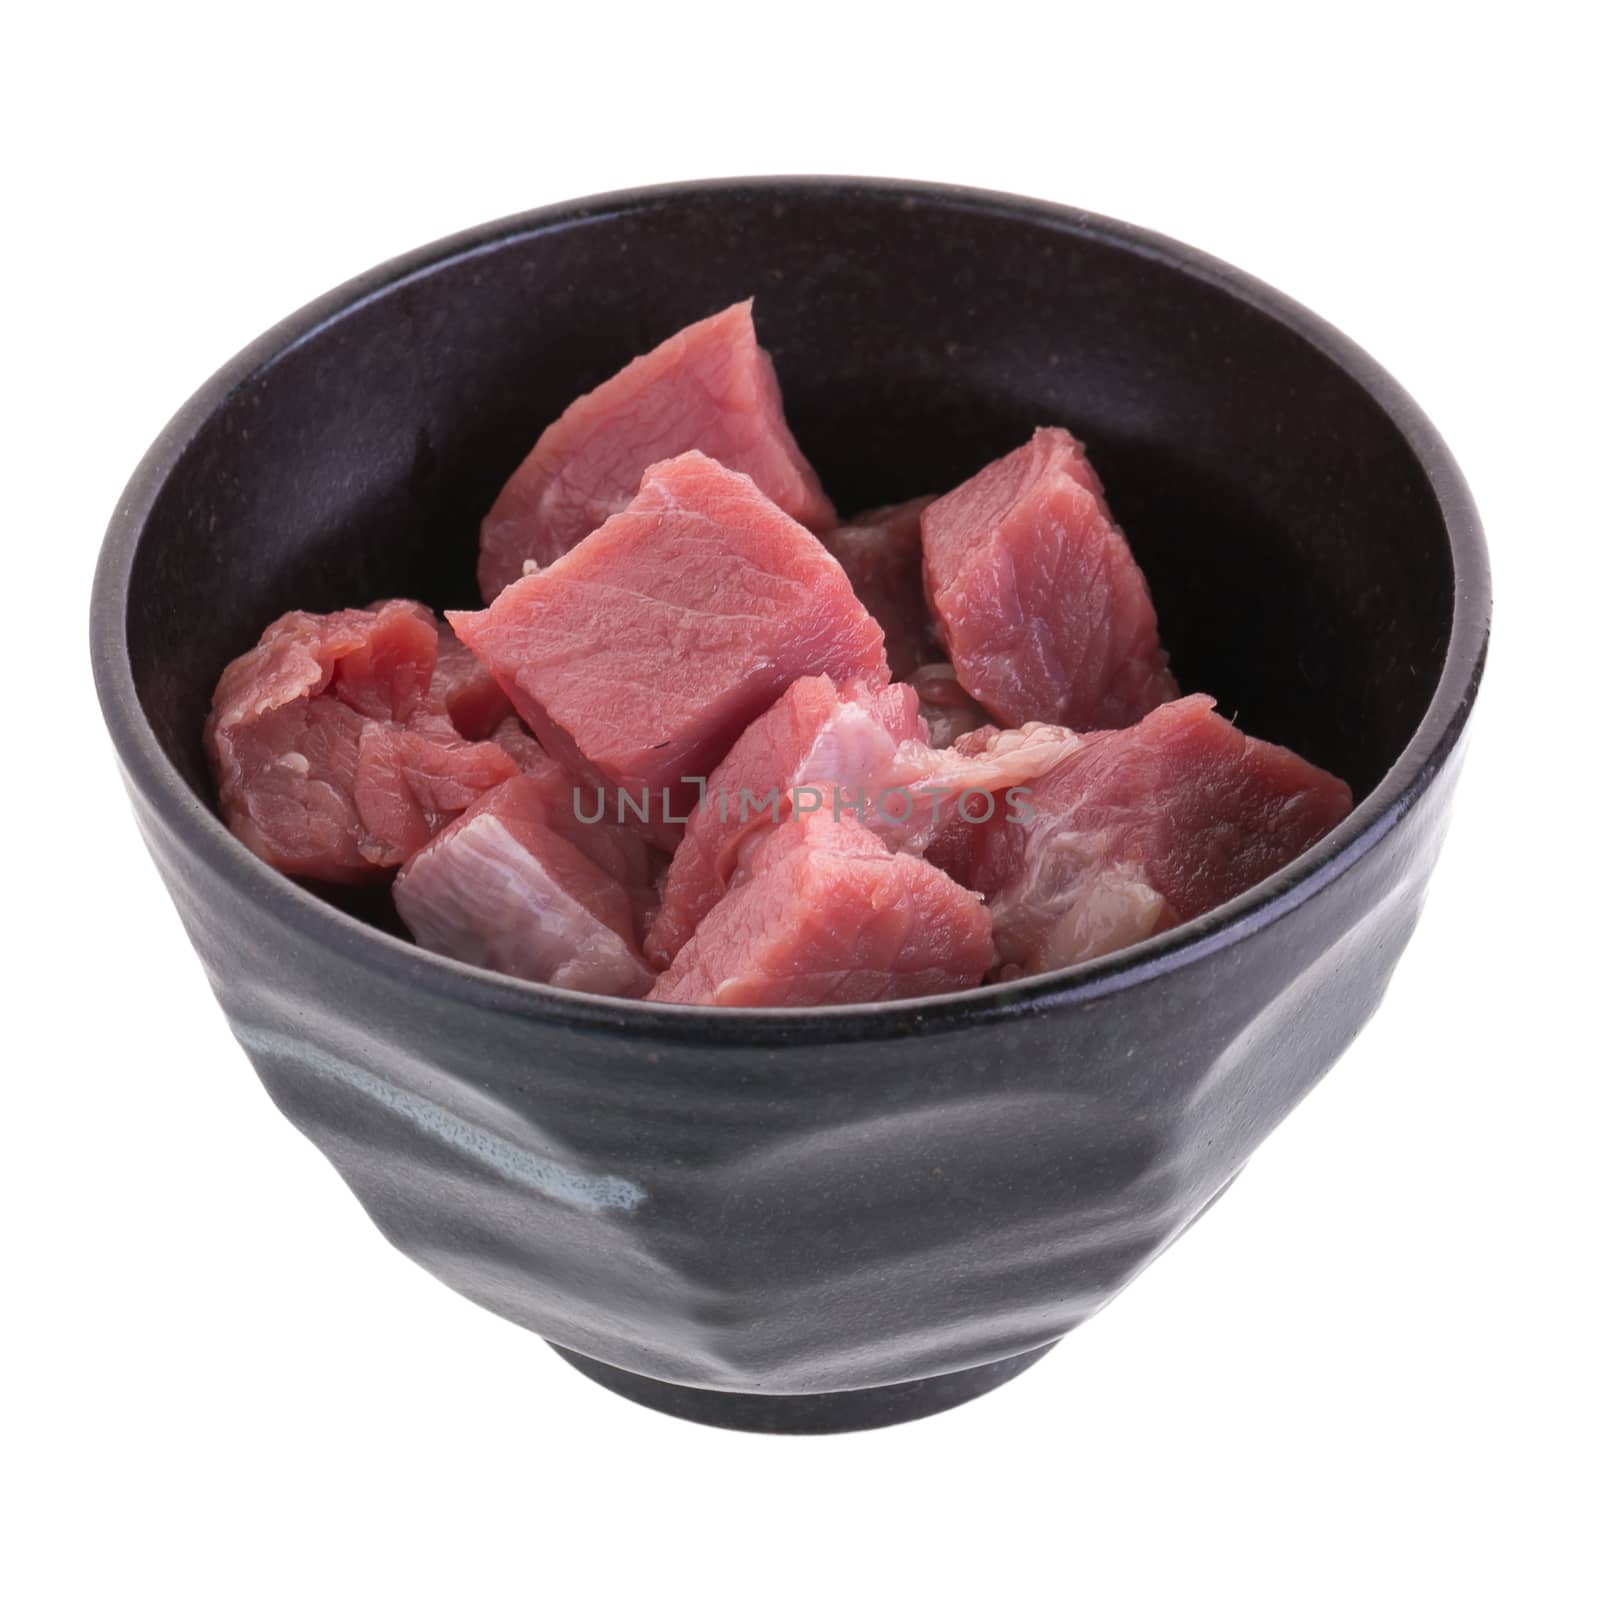 fresh raw beef cubes in black bowl isolated on white background by kaiskynet